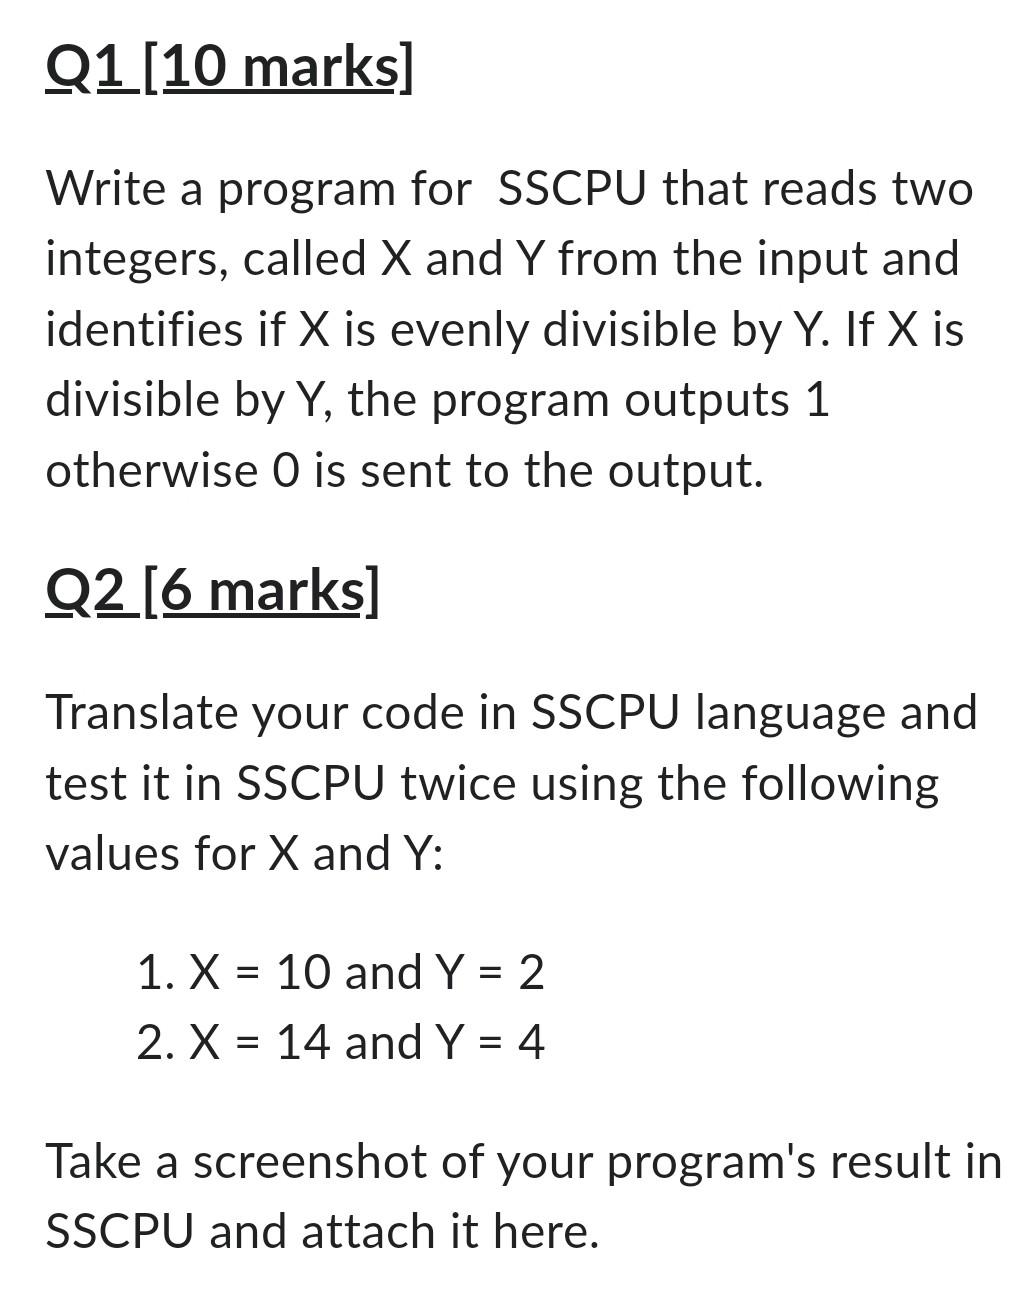 Q1 [10 marks] Write a program for SSCPU that reads two integers, called X and Y from the input and identifies